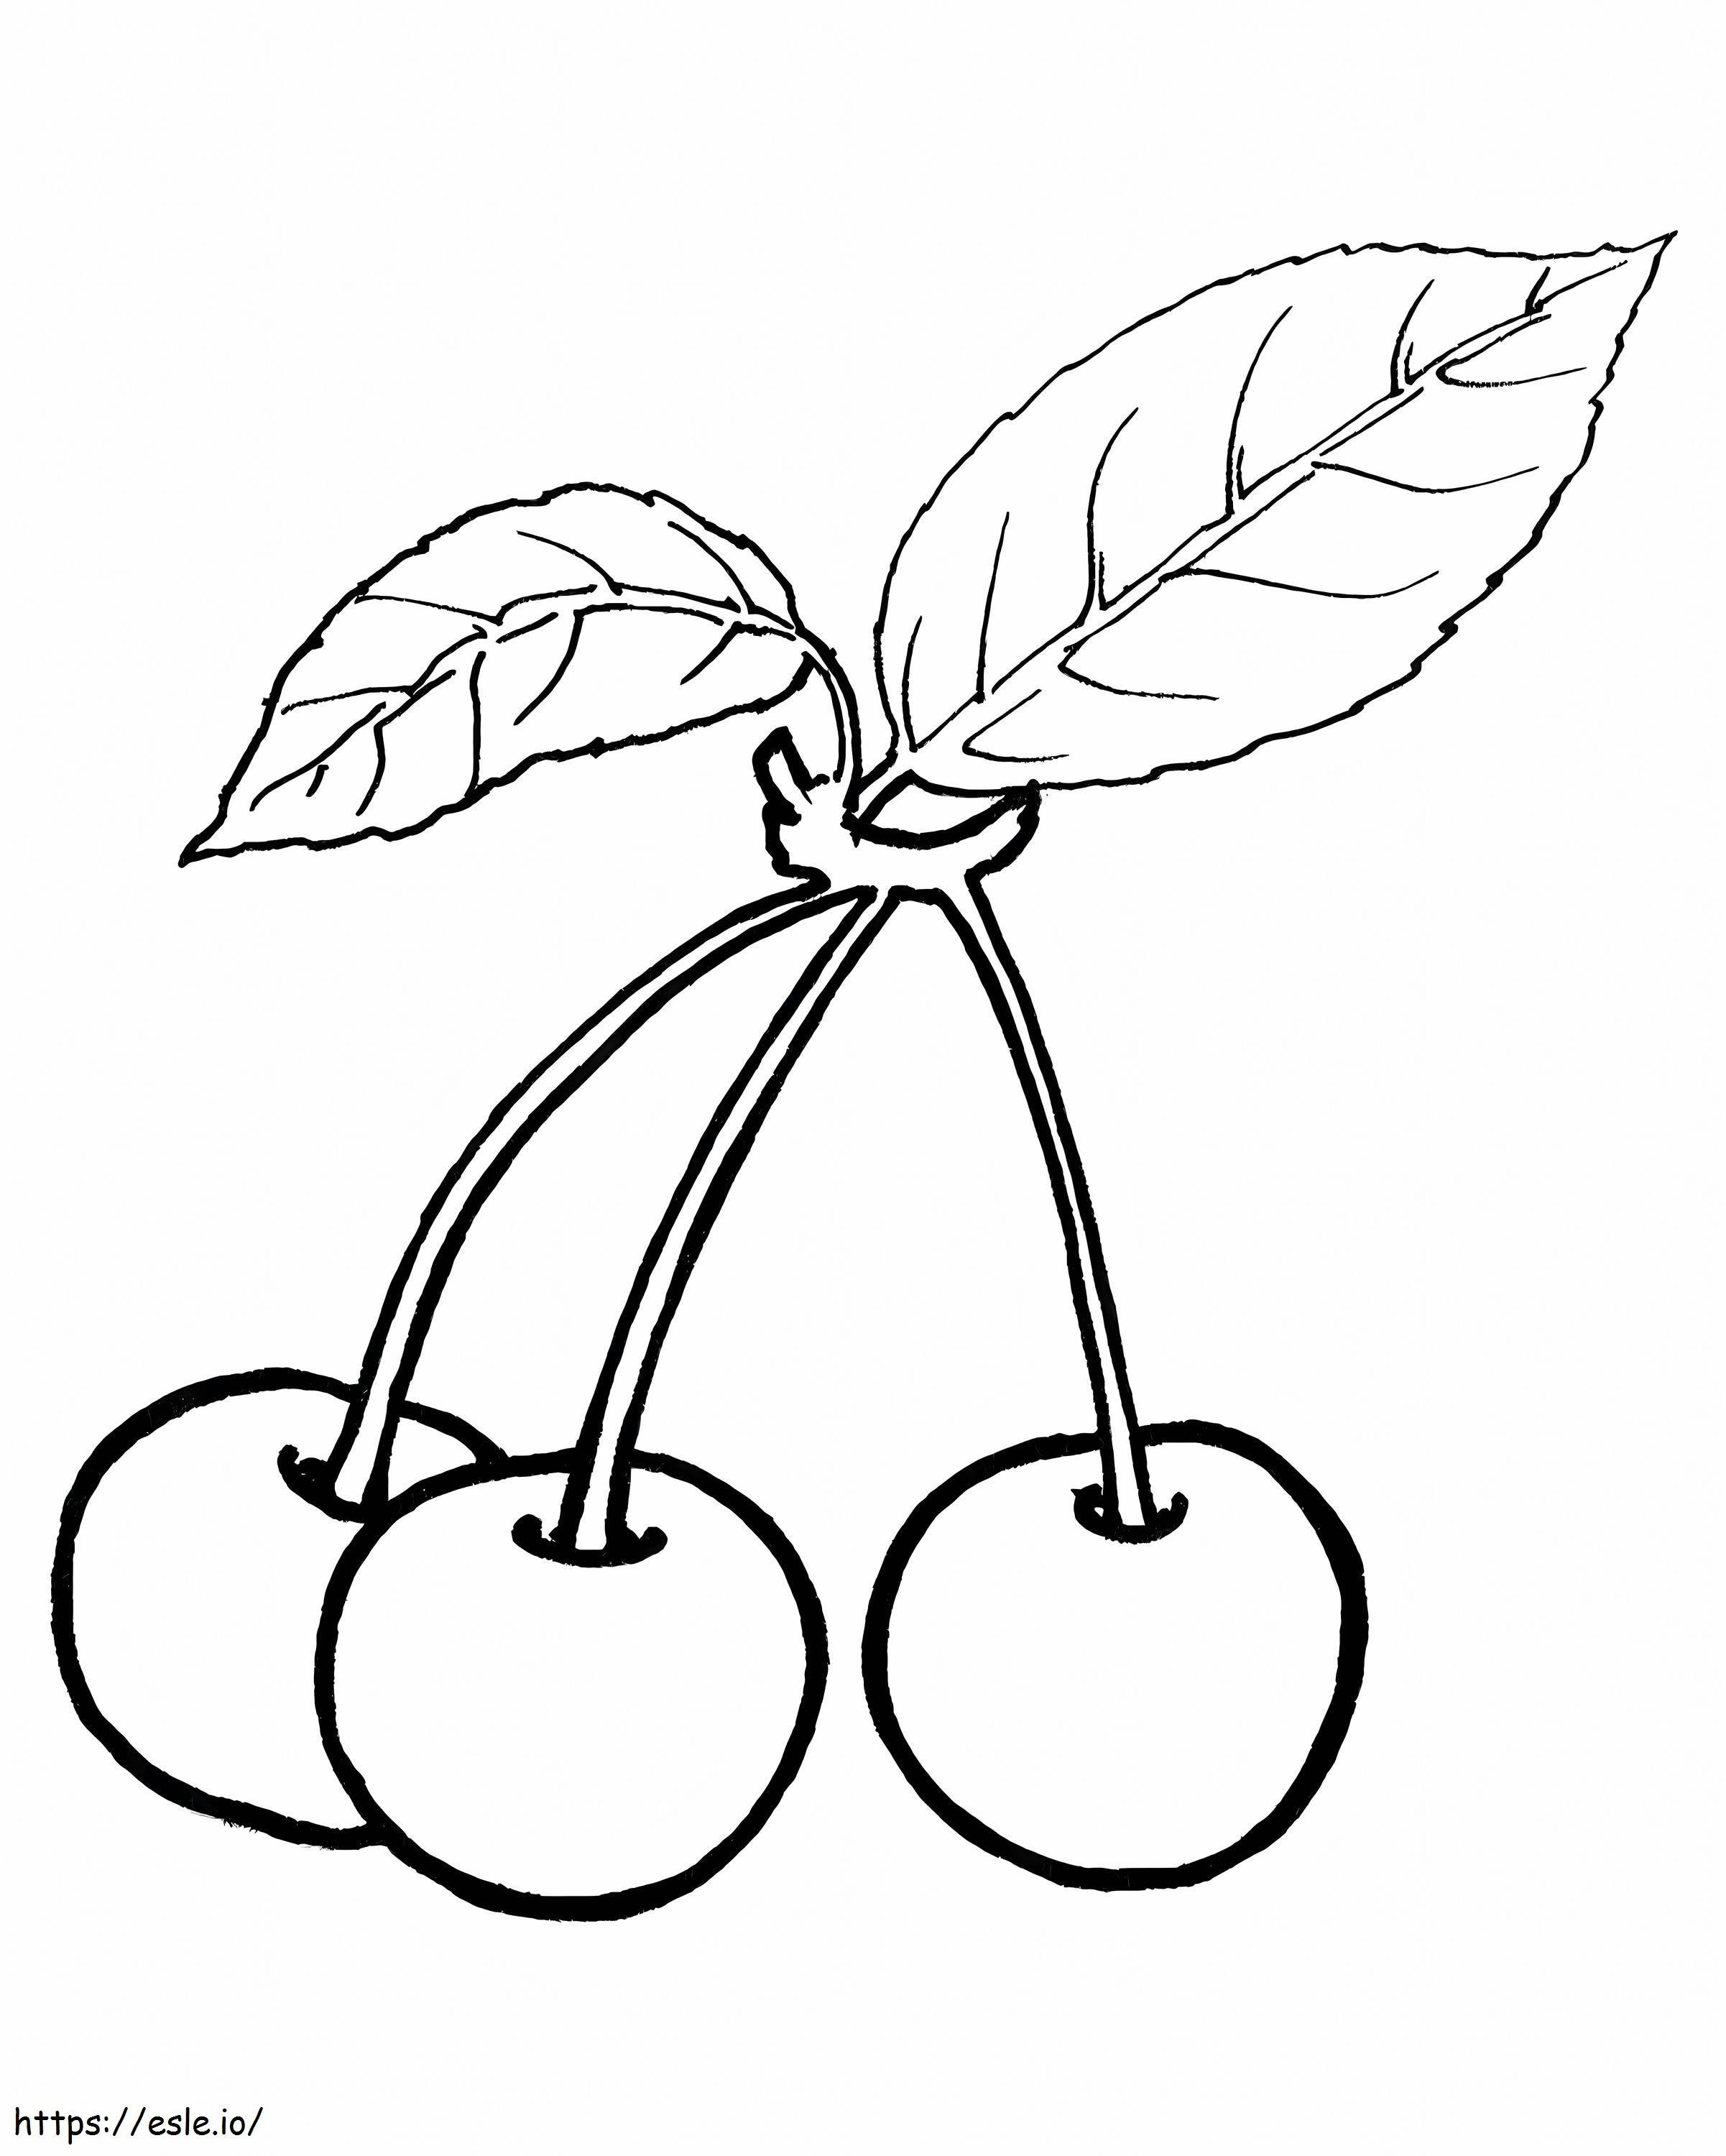 Three Cherries With Leaf coloring page